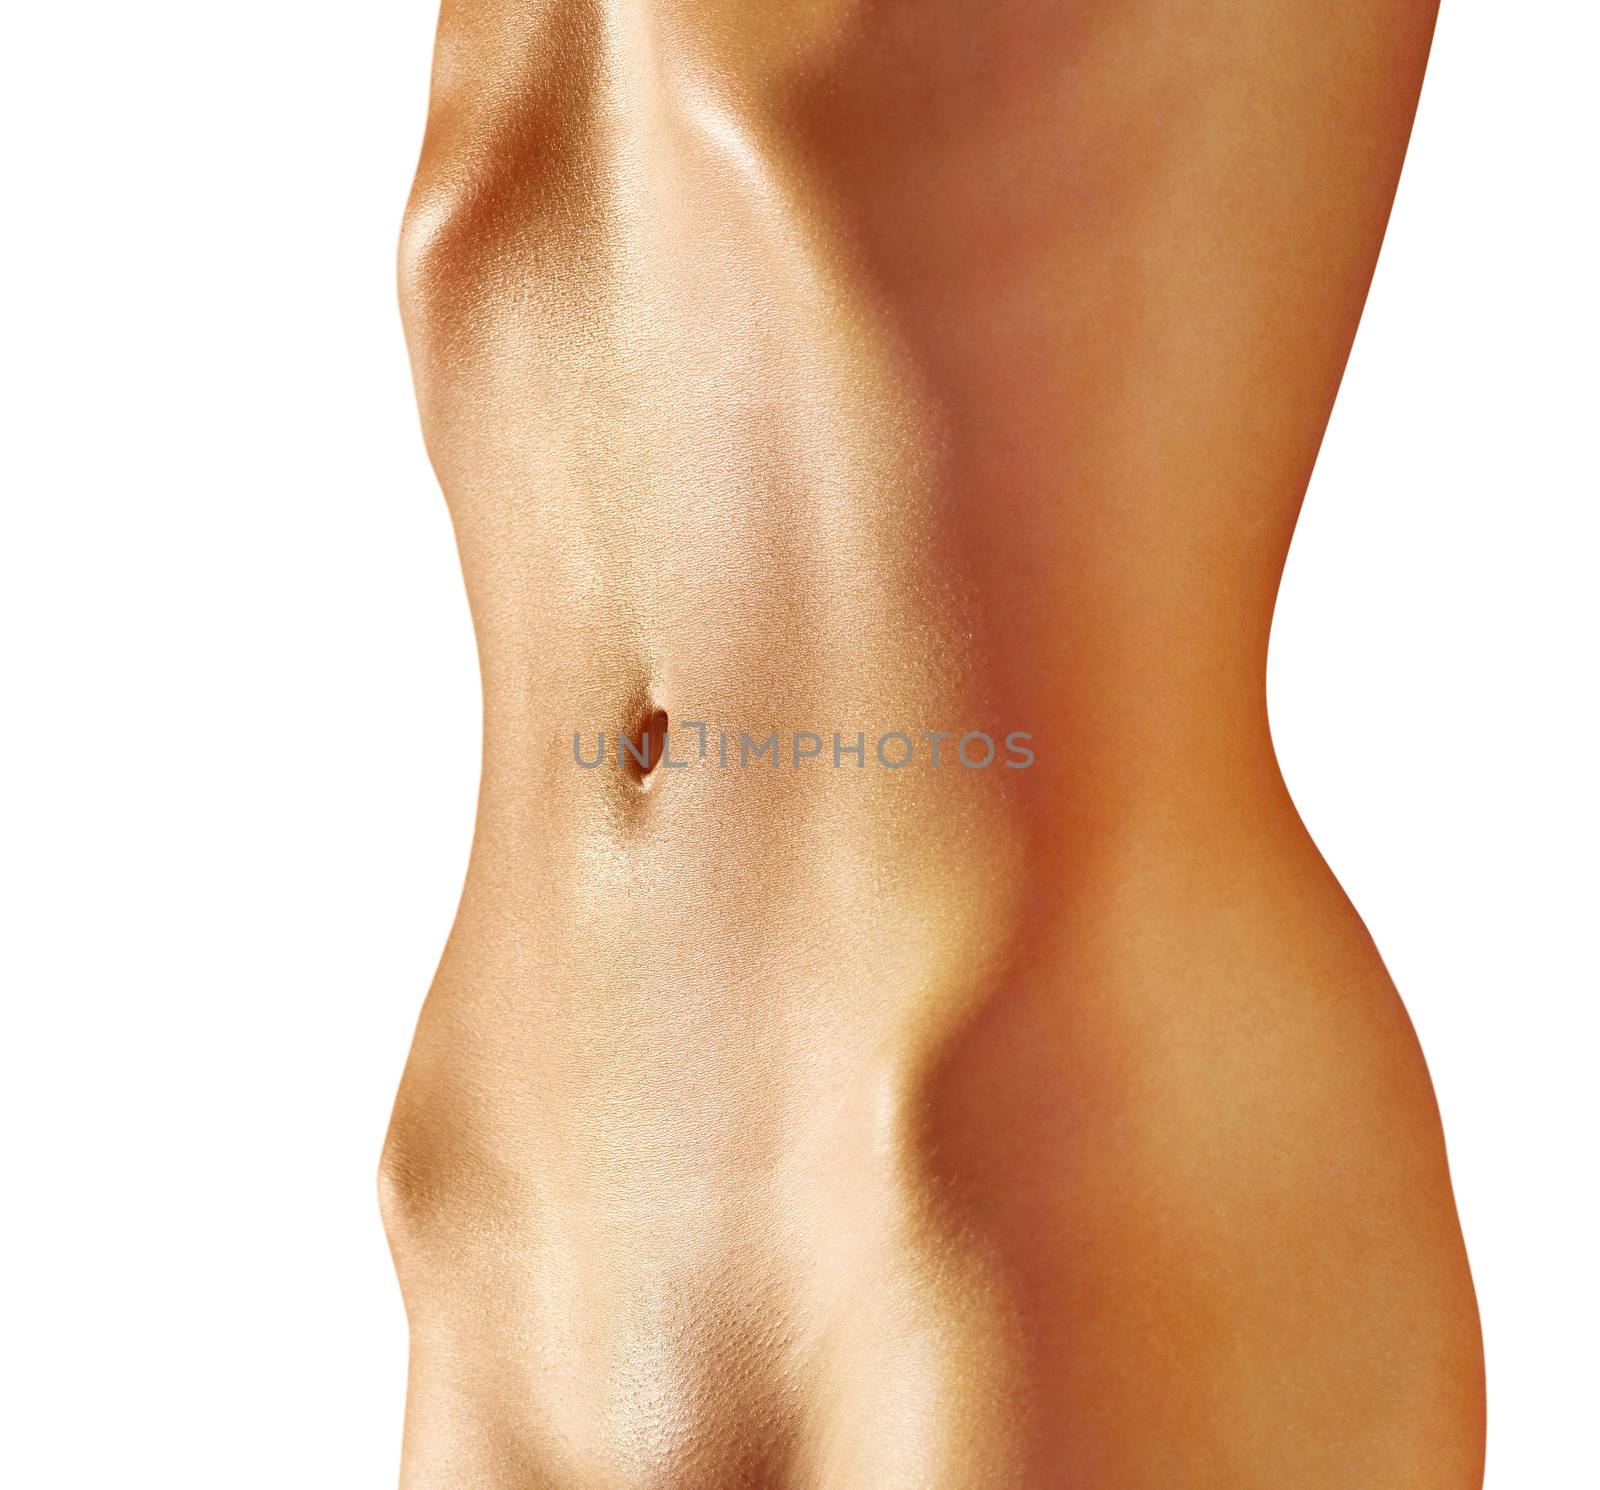 abdomen of woman, isolated on white background